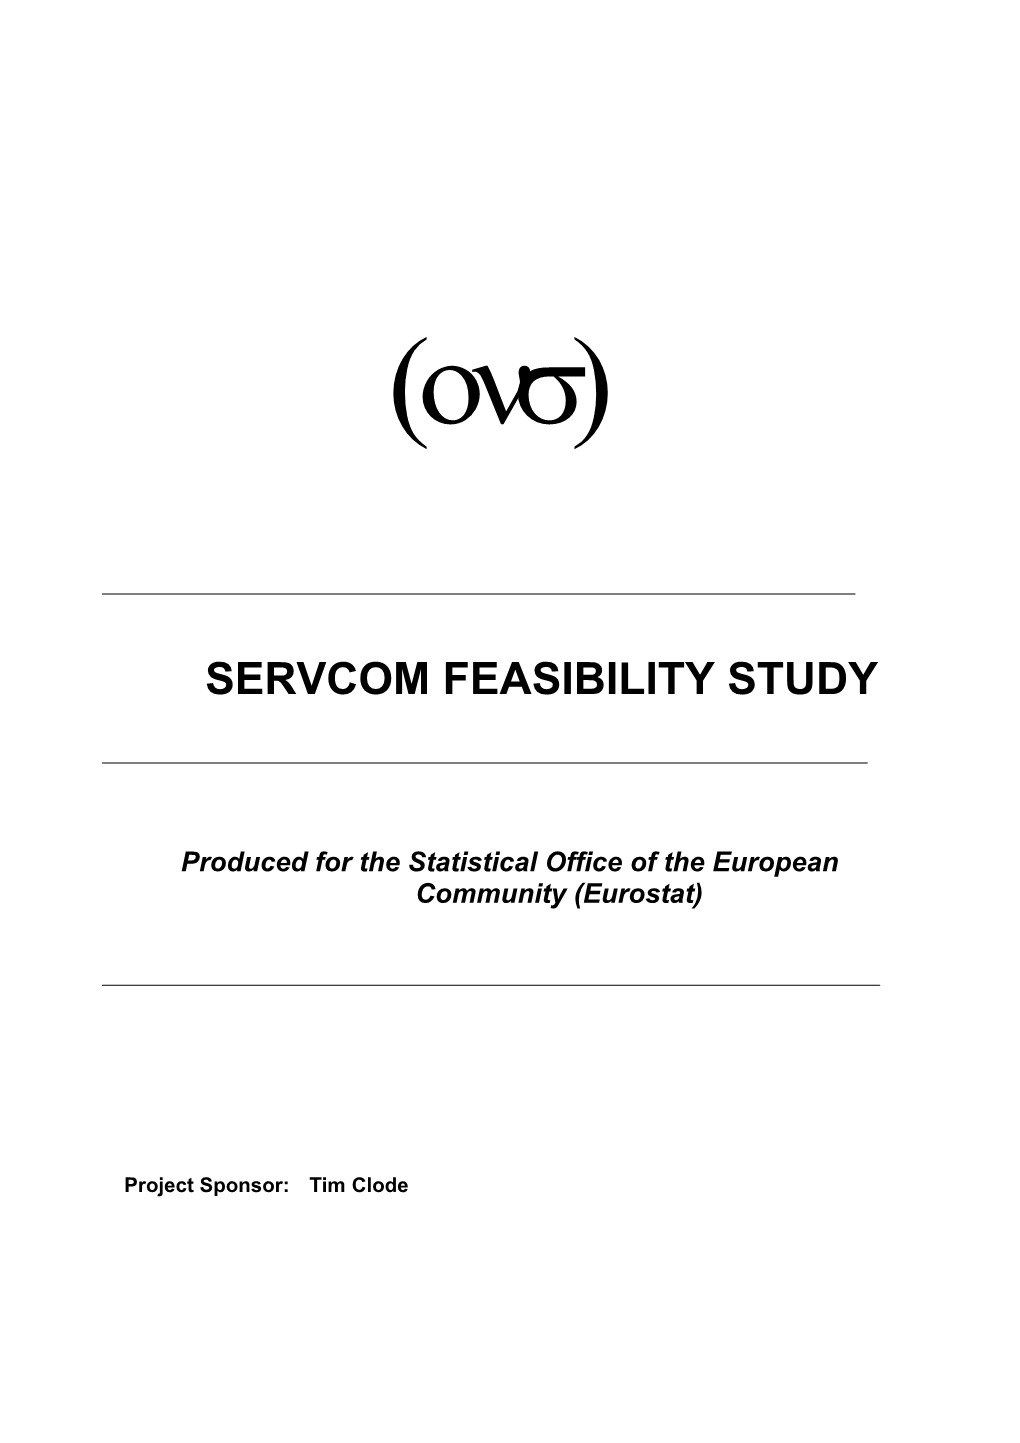 Produced for the Statistical Office of the European Community (Eurostat)